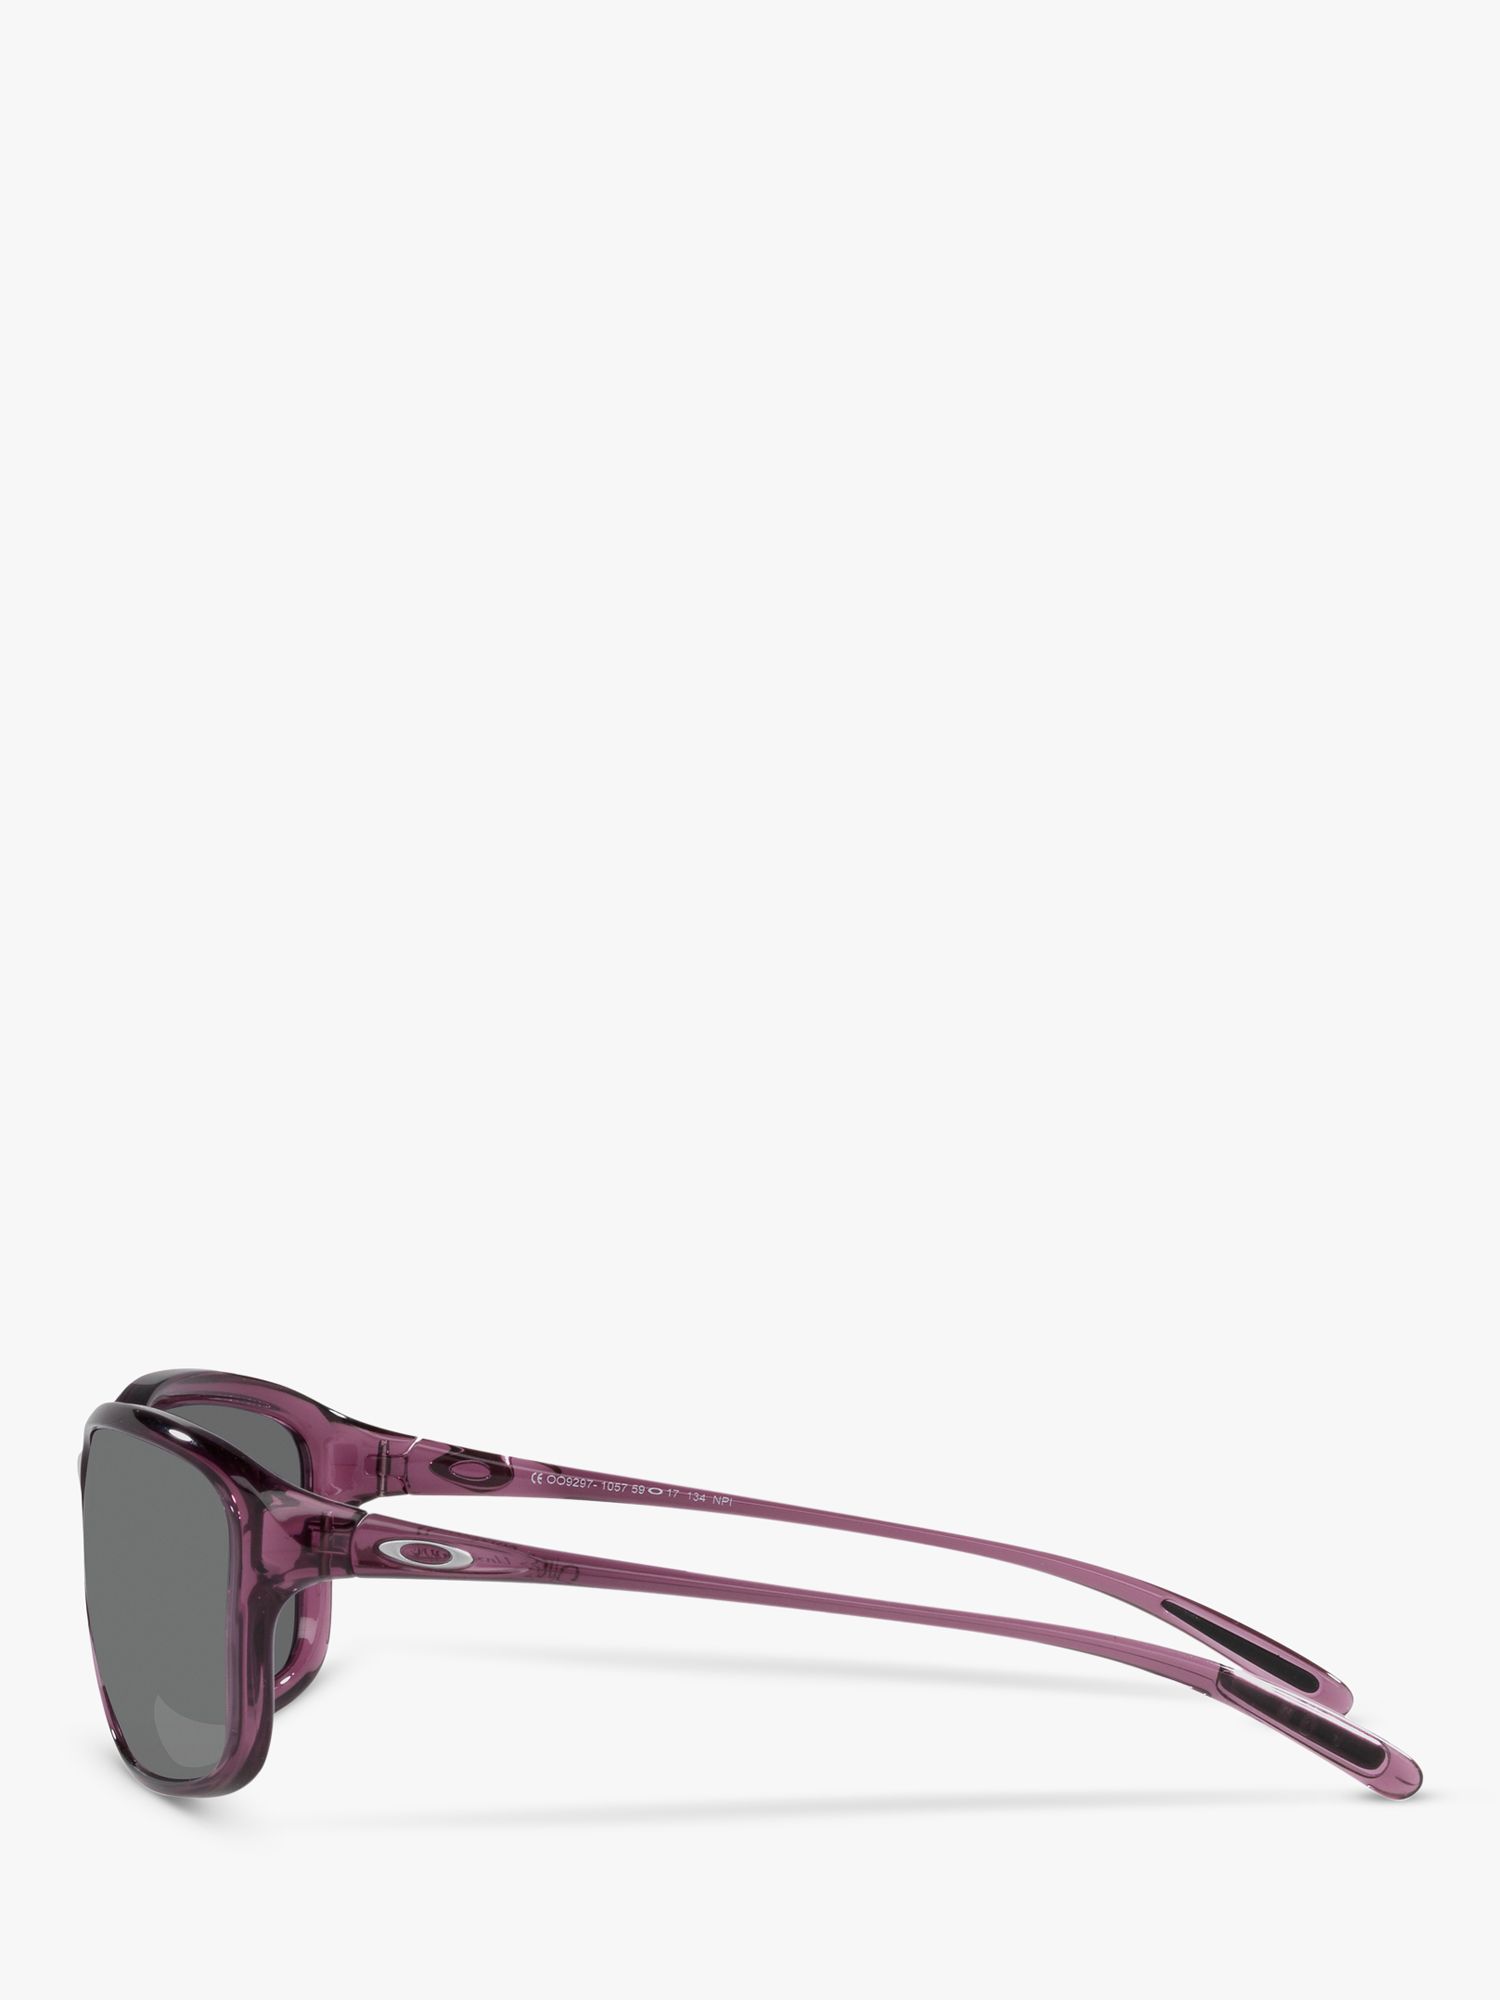 Oakley OO9297 Women's She's Unstoppable Oval Sunglasses, Translucent  Indigo/Grey at John Lewis & Partners